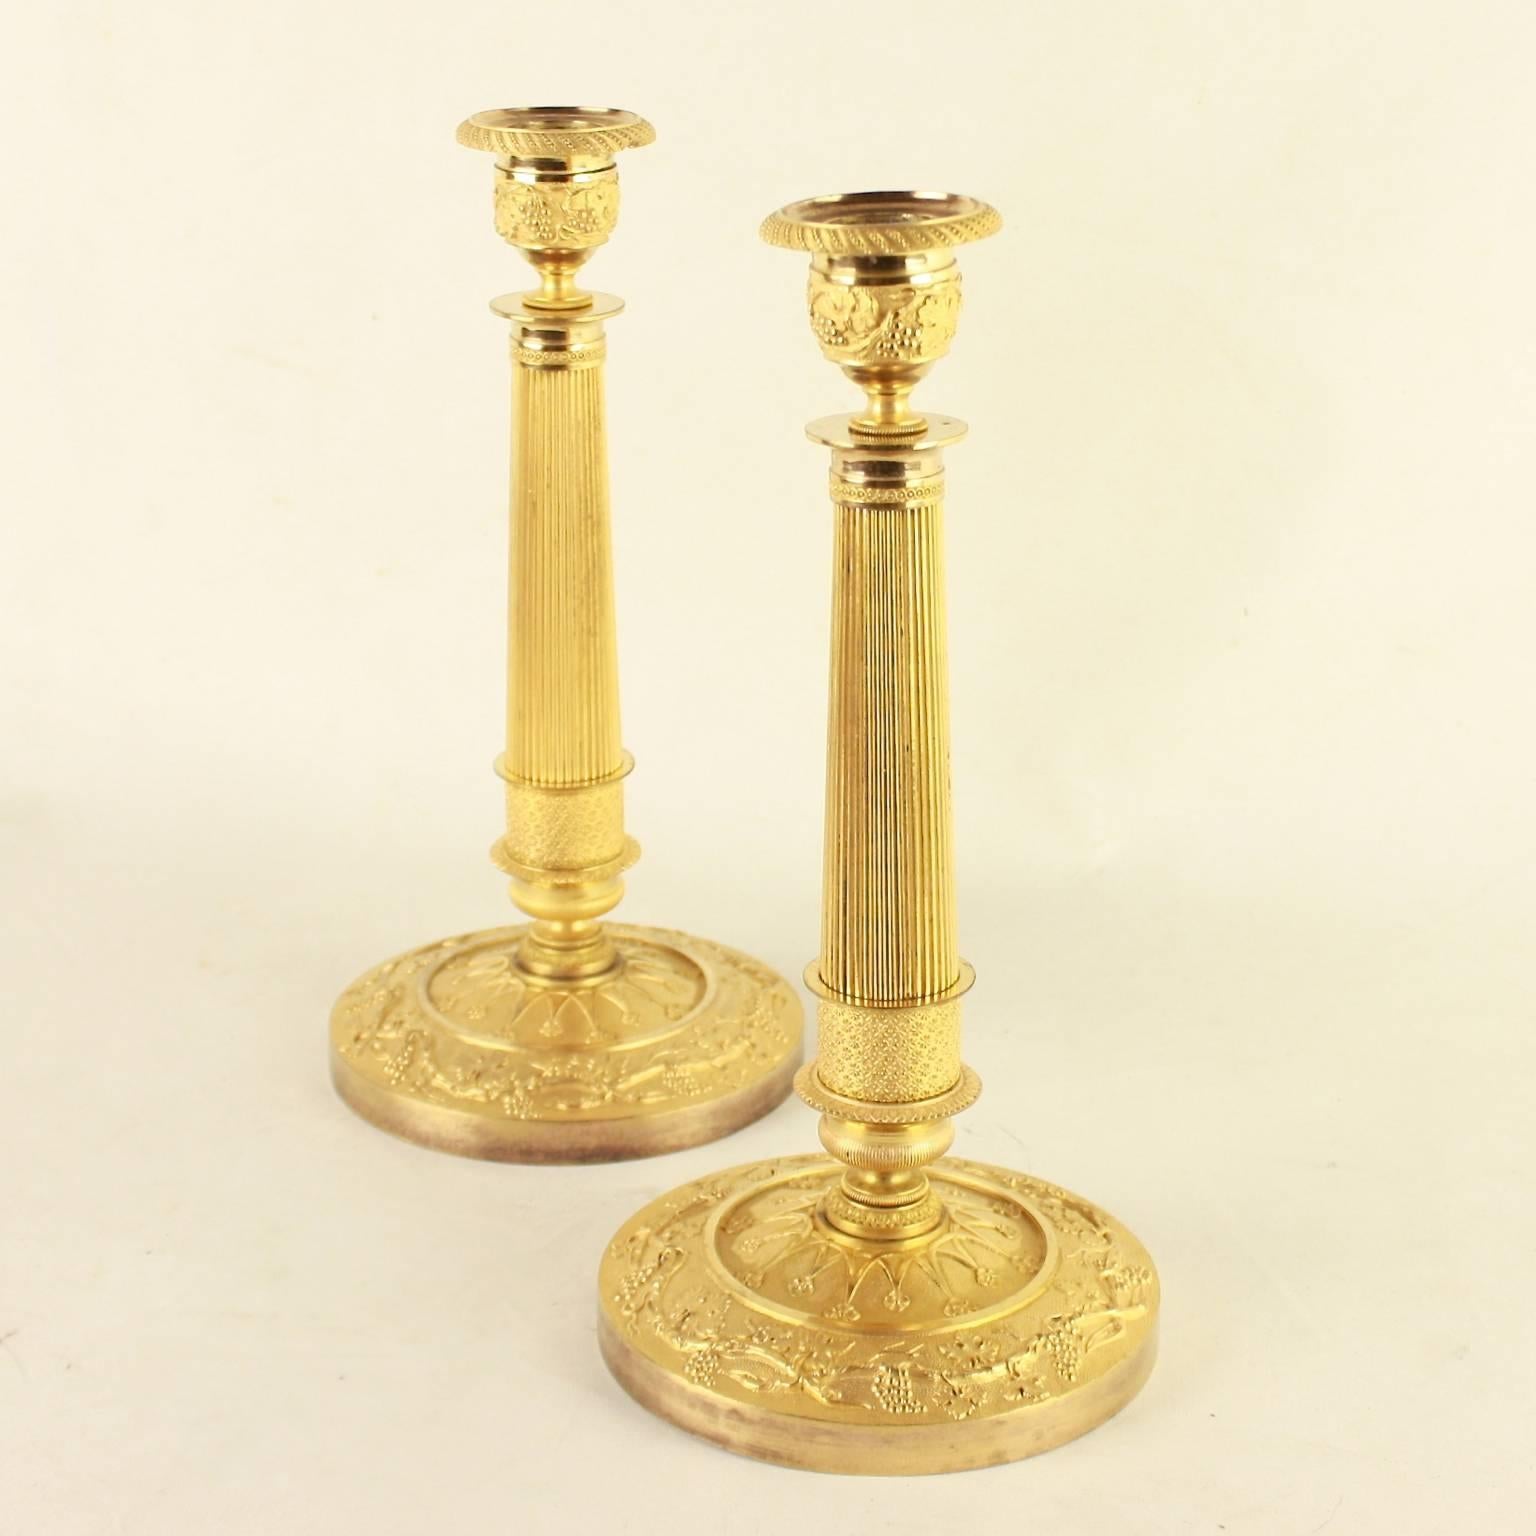 Pair of Empire ormolu candlesticks with beaded and finely chased drip pans, nozzles with vine leaves, grapes and tendrils on a fluted shaft resting on a circular base with a doomed foot. The base again finely chased with vine decoration. The decor